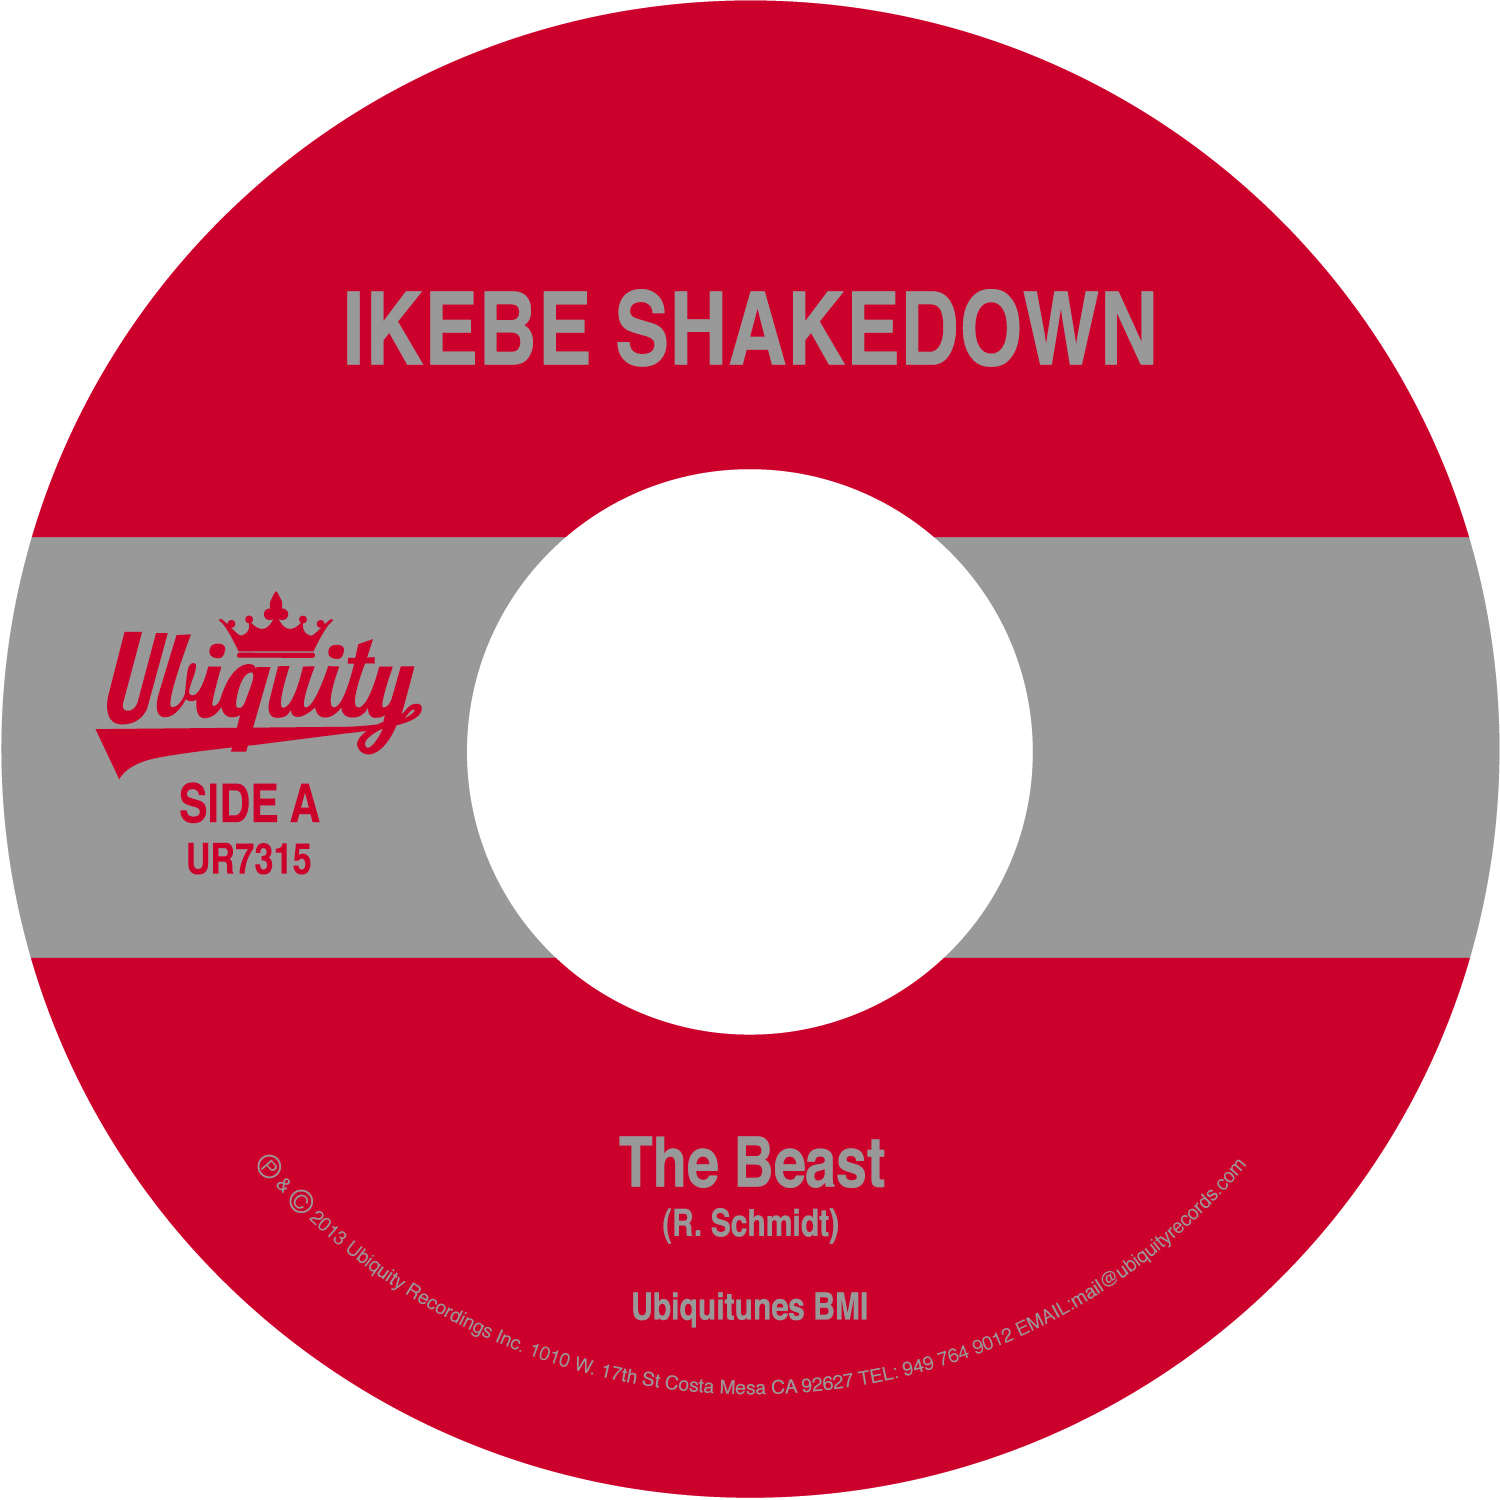 NEW IKEBE SHAKEDOWN 45 RELEASED THIS WEEK « Record-